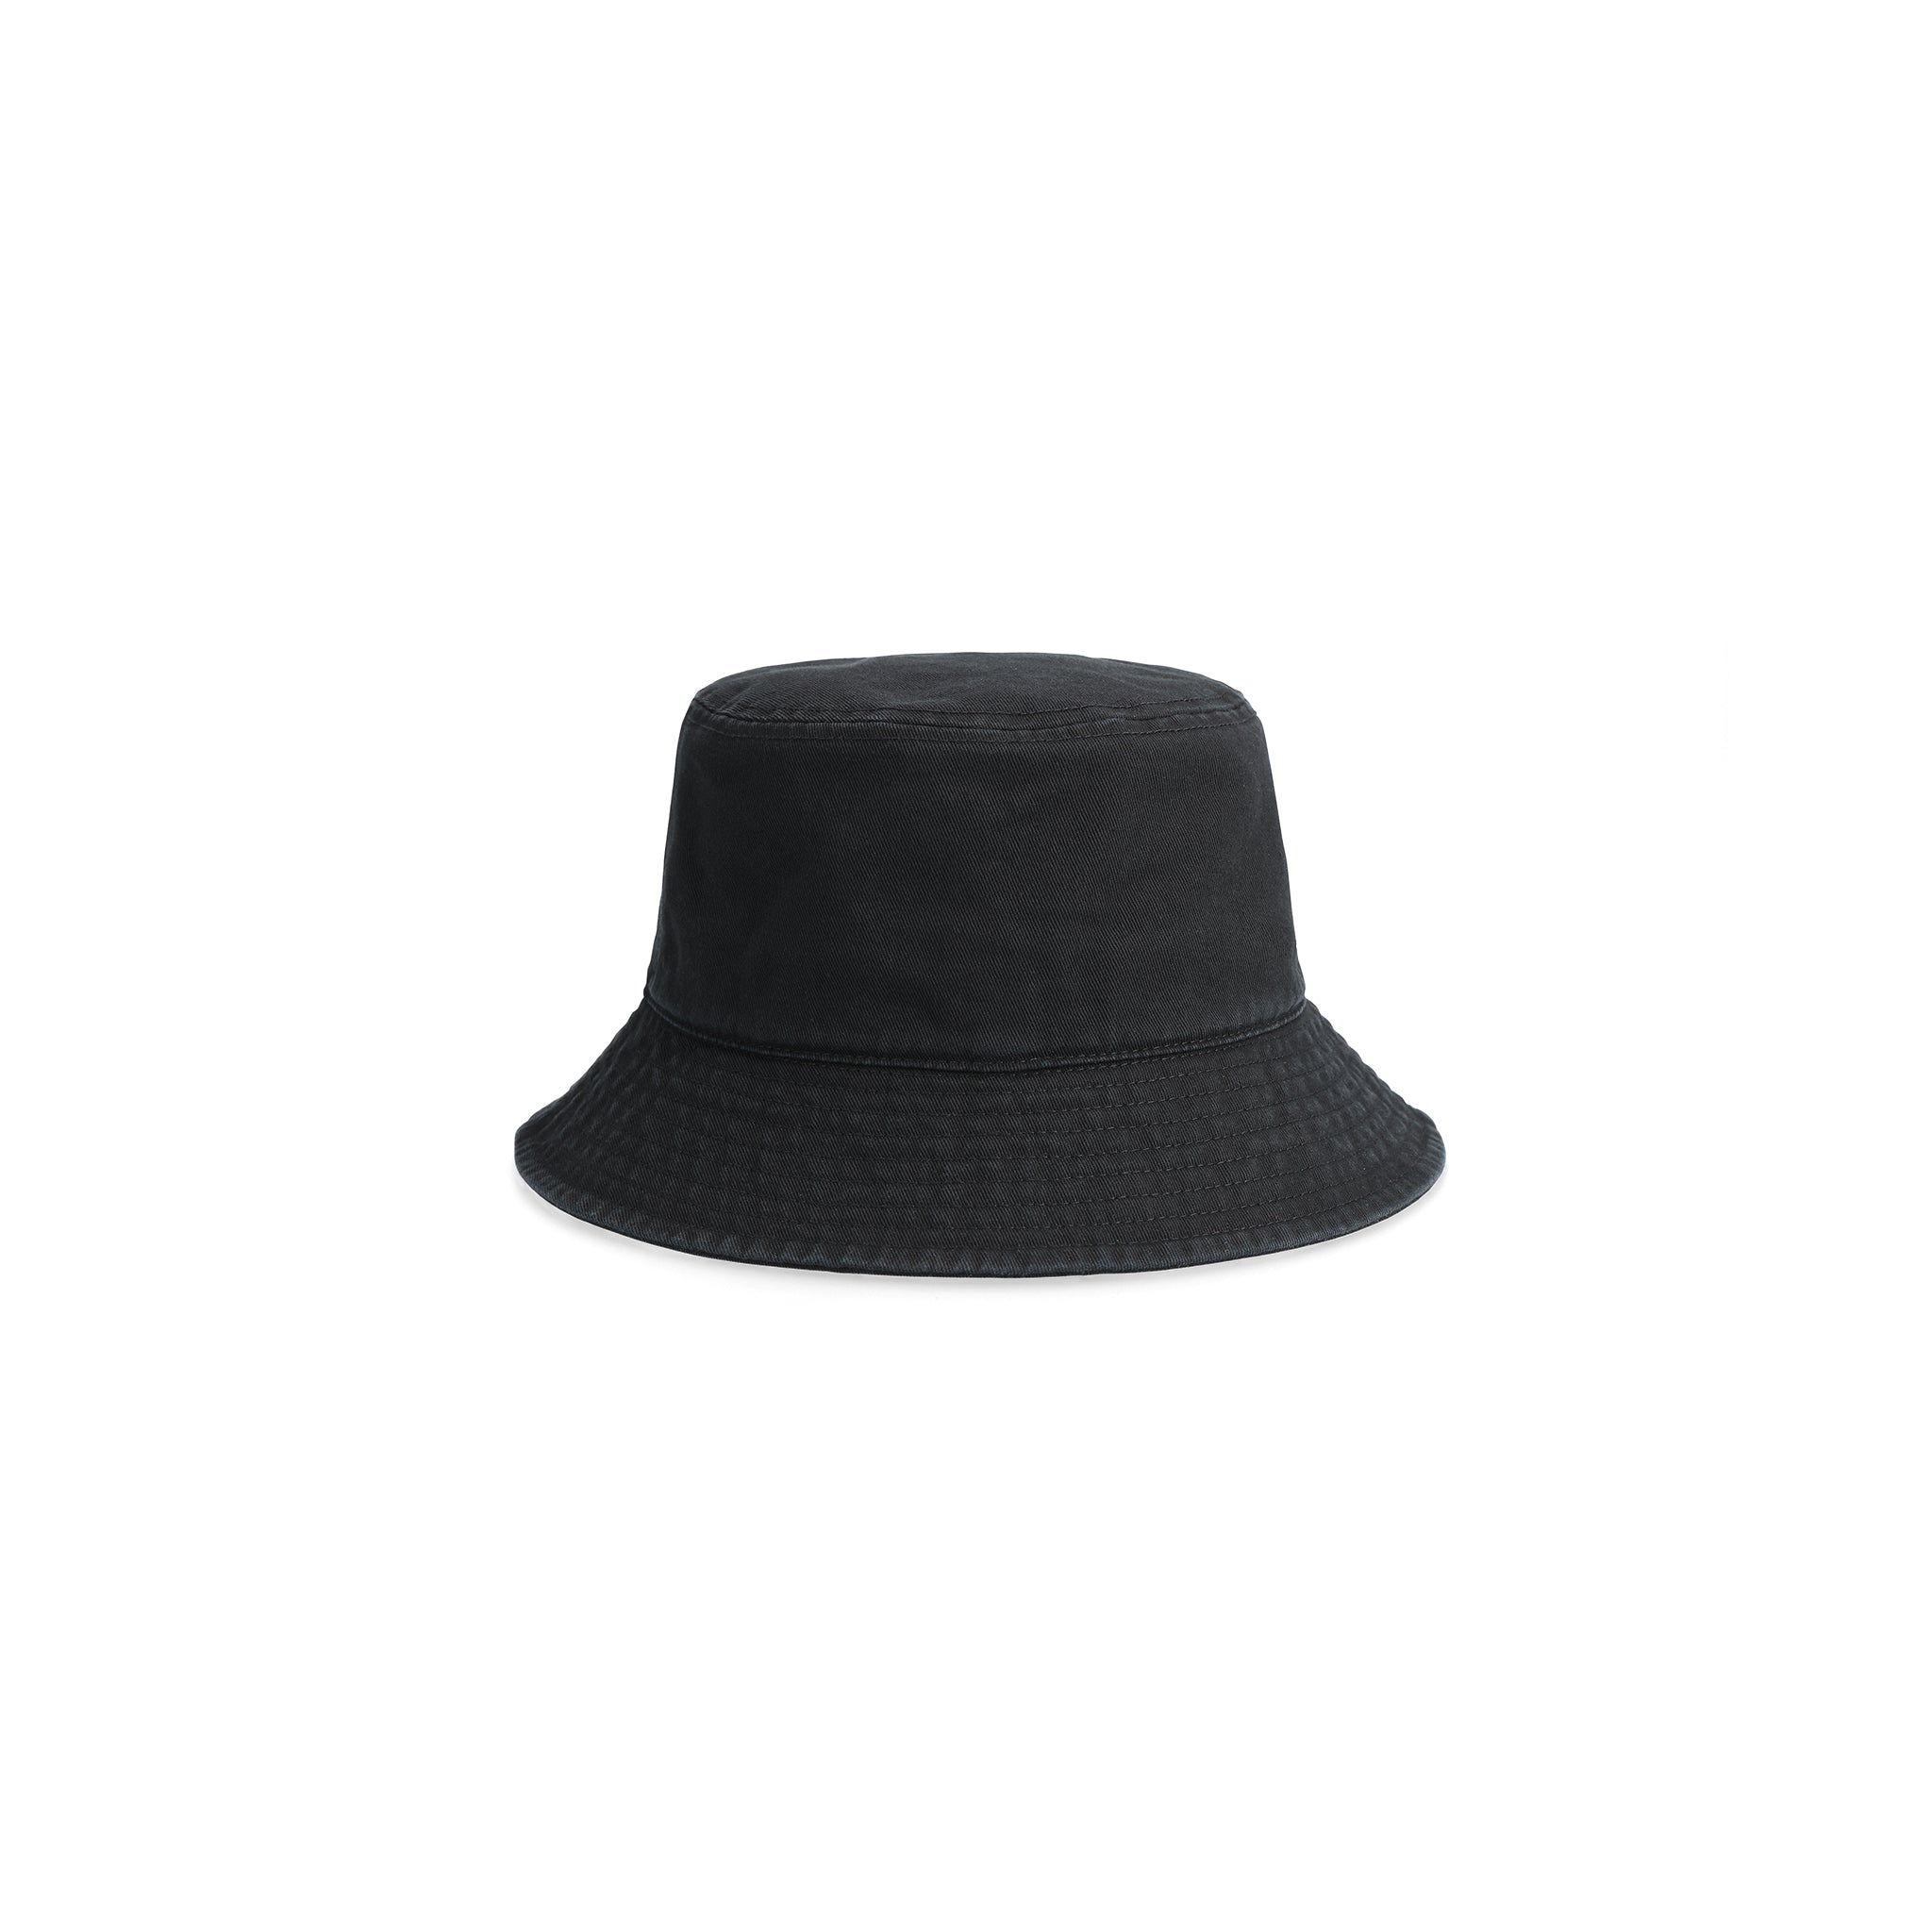 Back View of Topo Designs Dirt Bucket Hat in "Black"